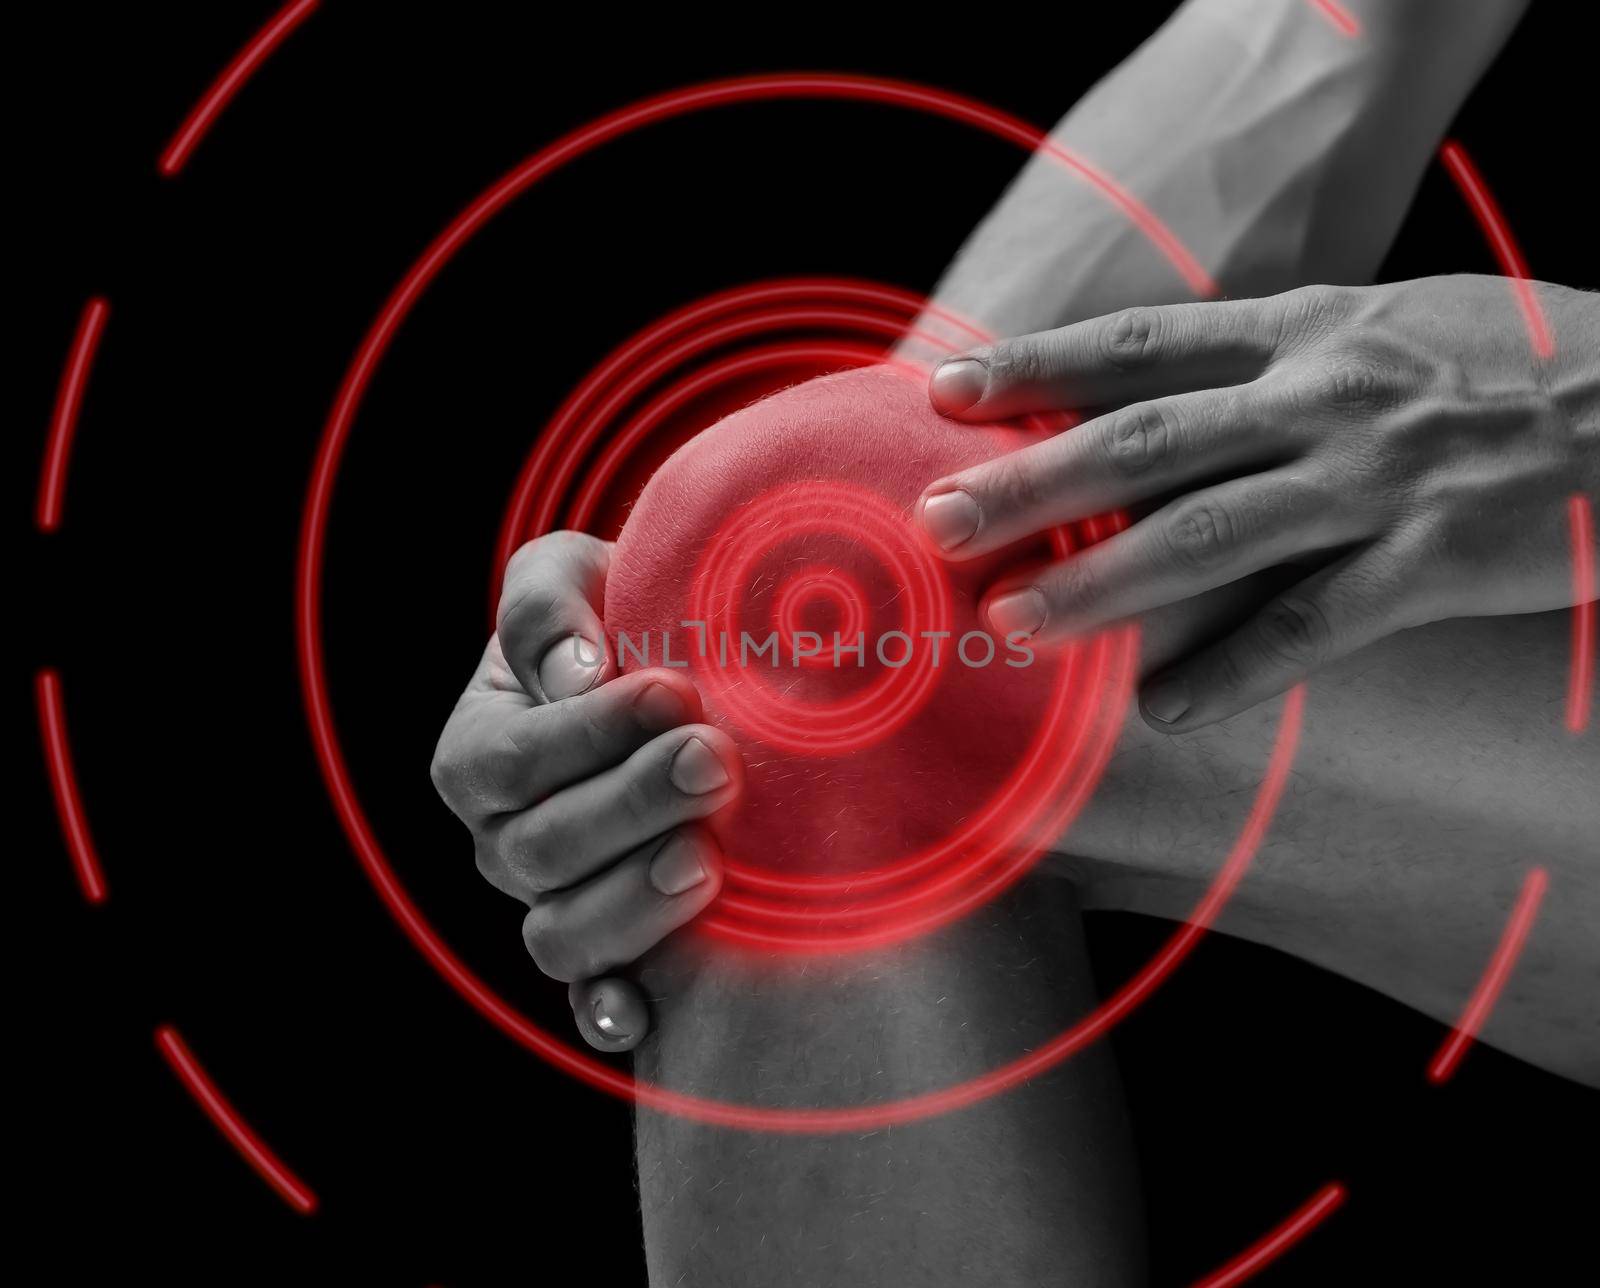 Pain in the knee joint, pain area of red color by alexAleksei